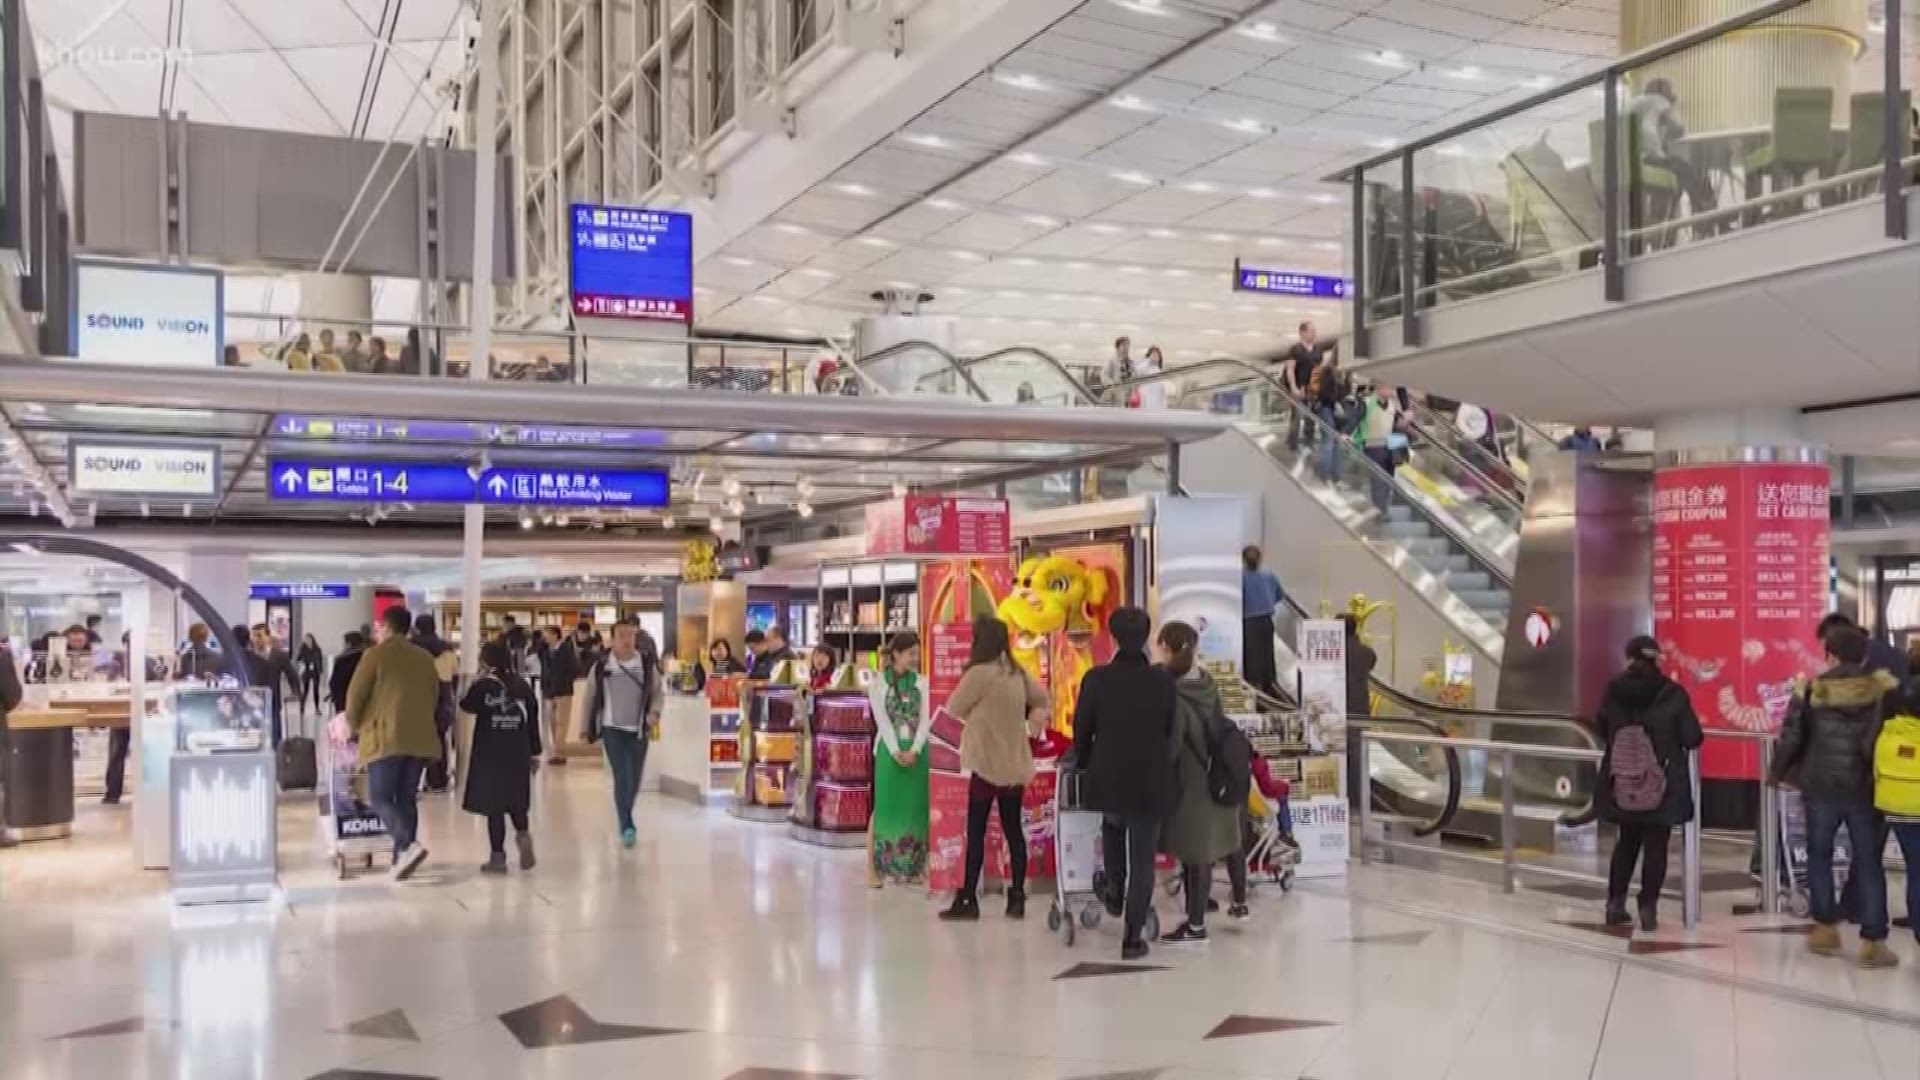 The retail industry is quickly moving online thanks to the rise of Amazon. And while brick and mortar stores struggle to stay afloat, there's one place they're still thriving — airports. Marcelino Benito has The Why.